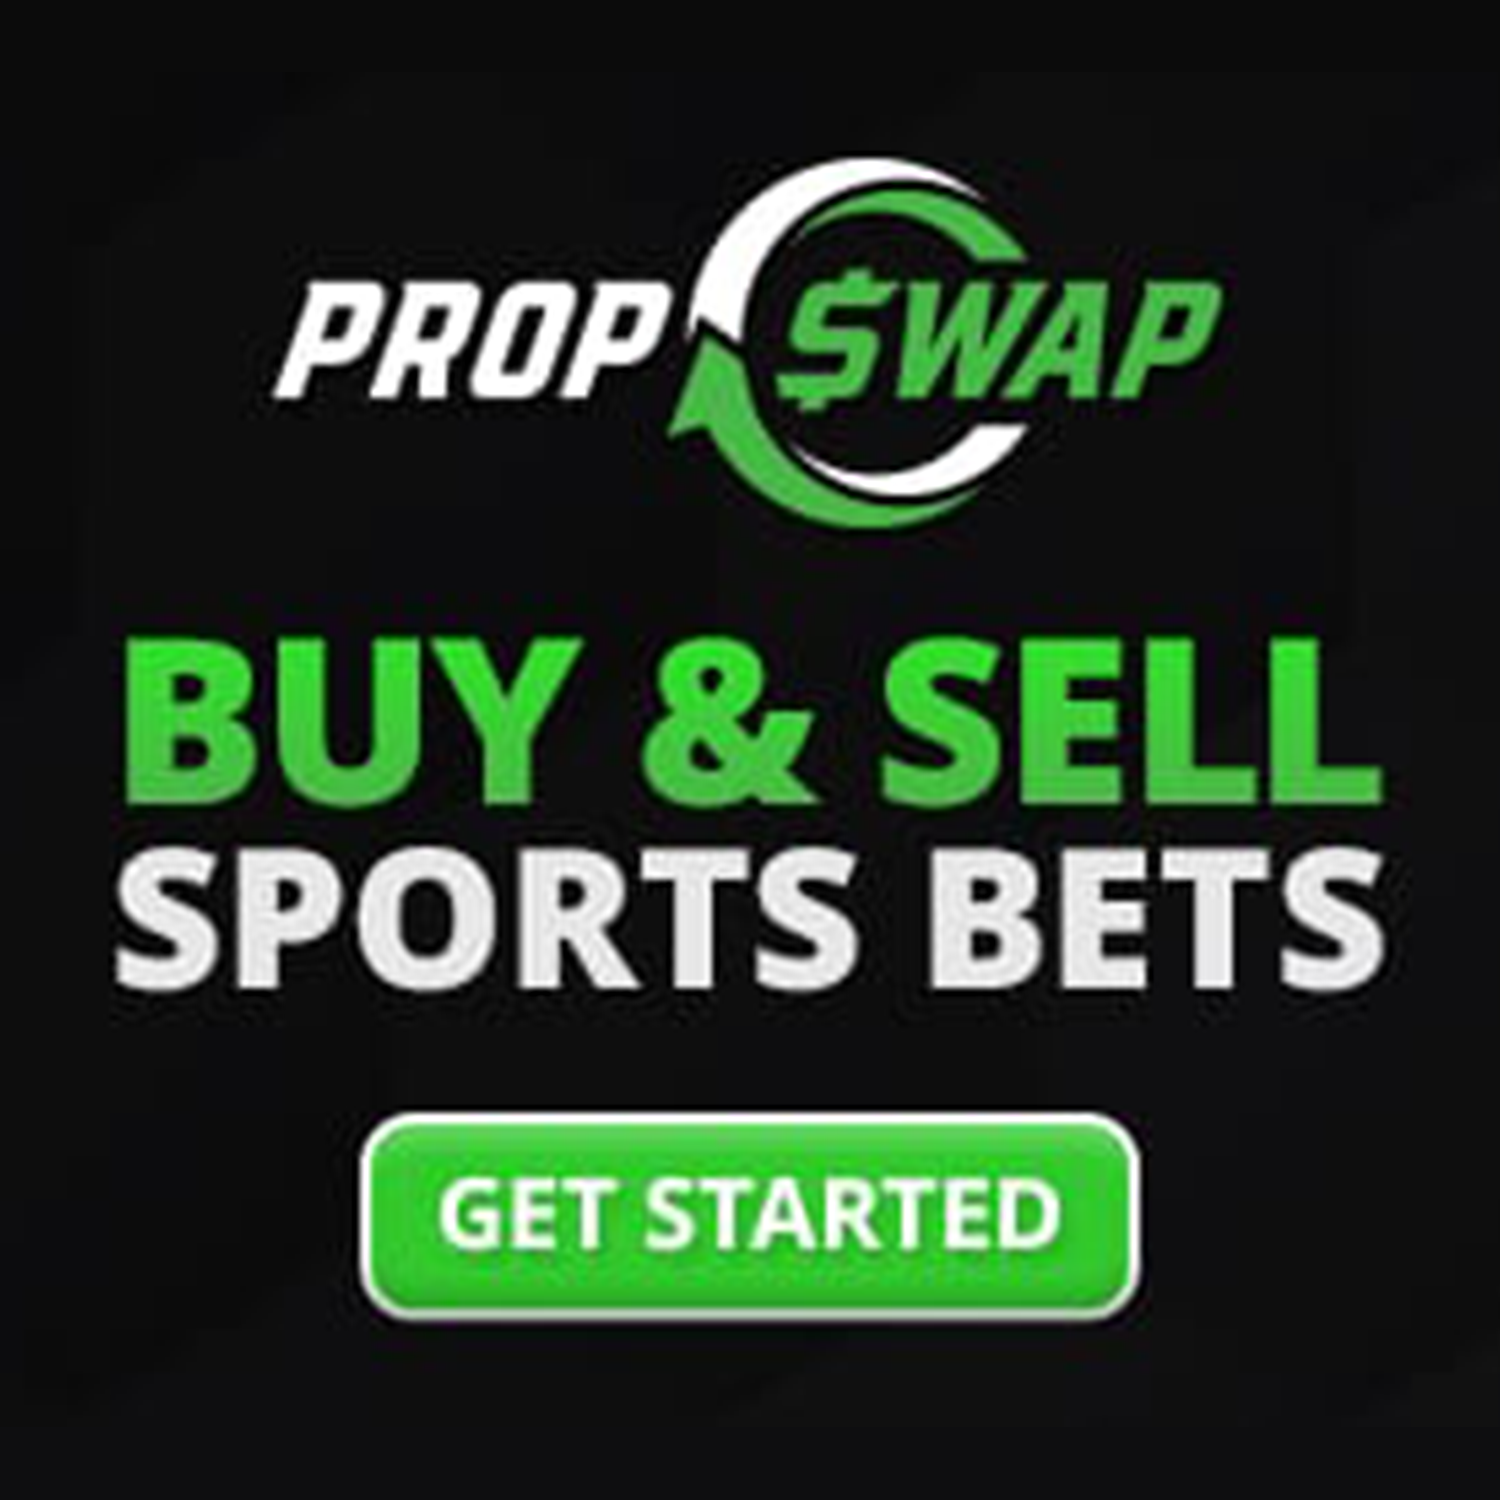 Prop Swap: Buy & Sell Sports Bets